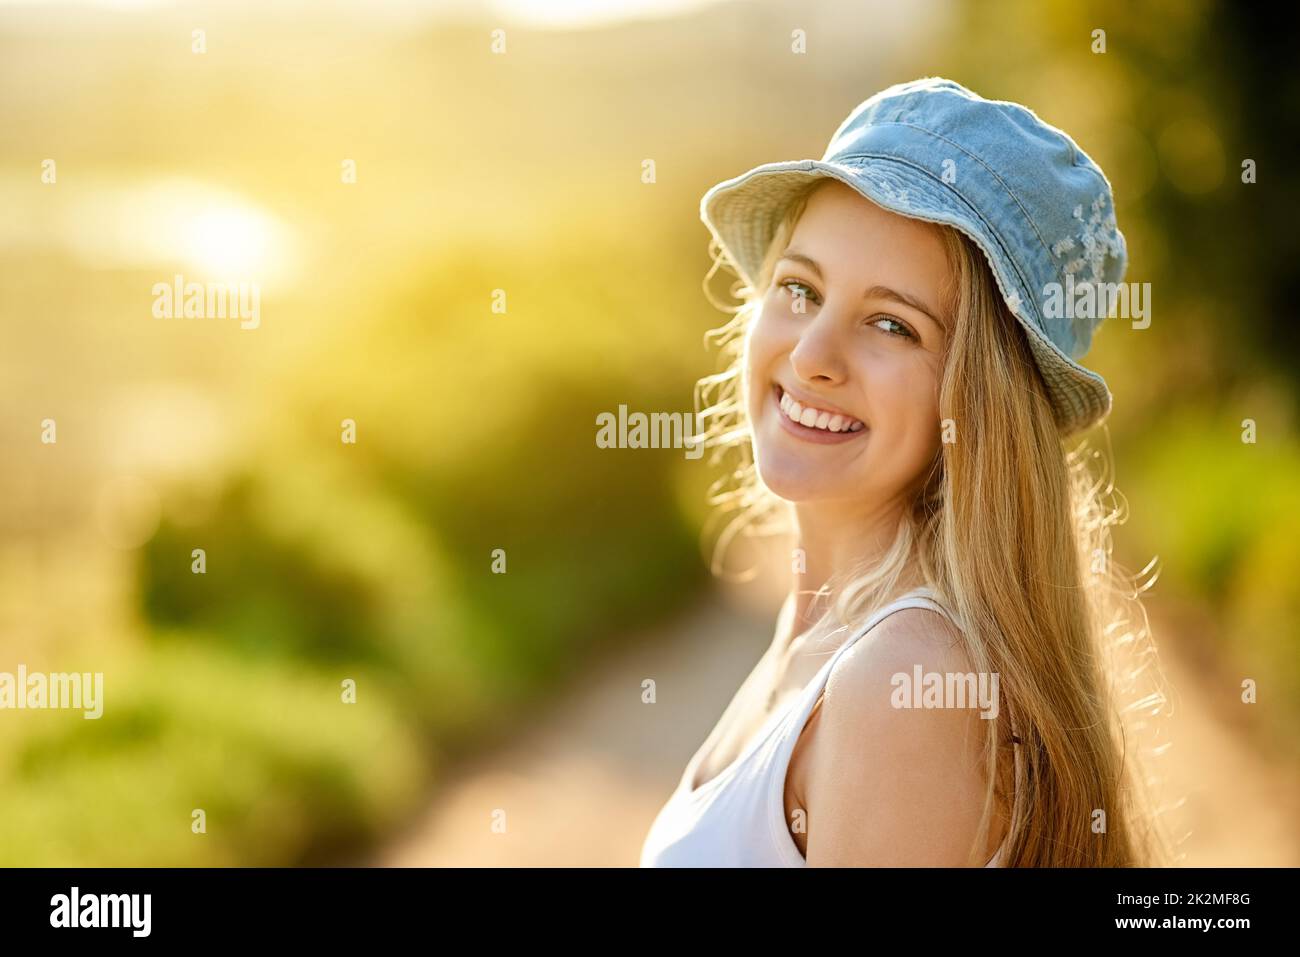 I love being outside. Shot of a young woman on a tree stump out in the countryside. Stock Photo